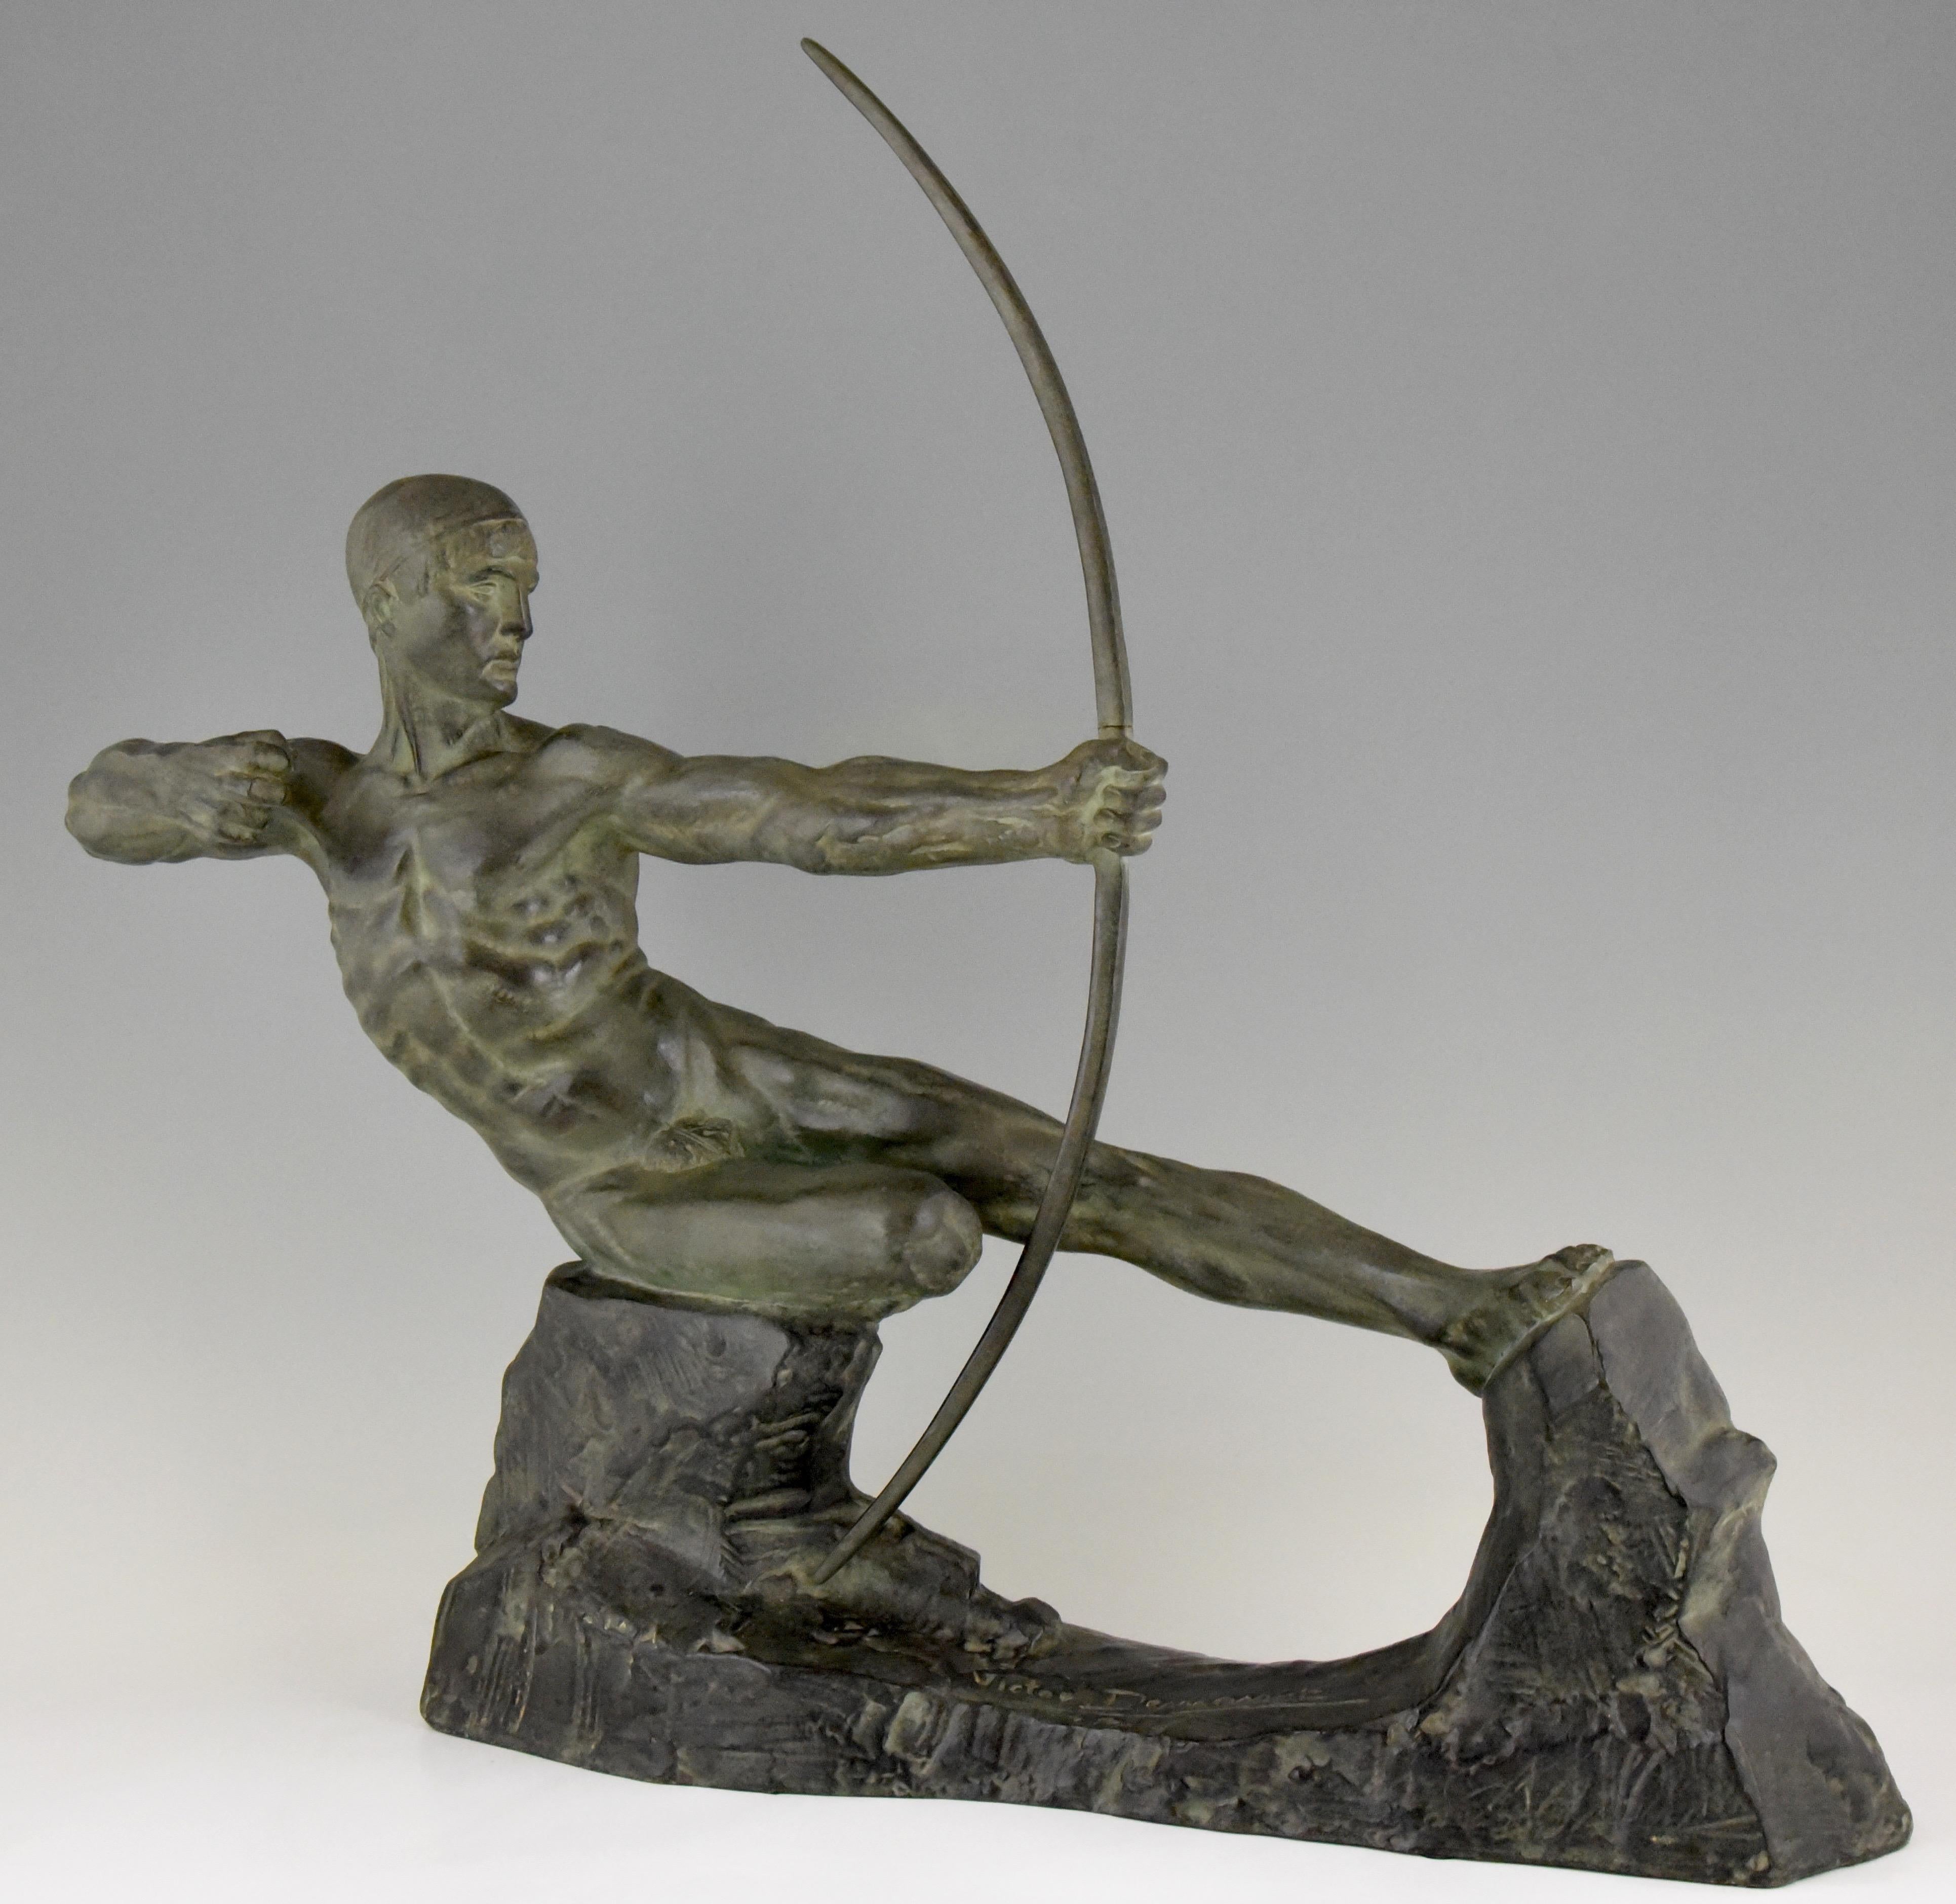 Beautiful Art Deco bronze sculpture of a male nude with bow. The title of this work is Hercules. Signed by Victor Demanet, a famous French artist. The bronze has a lovely green patina, circa 1925. 

Illustrated in
“Beeldhouwkunst in België” by